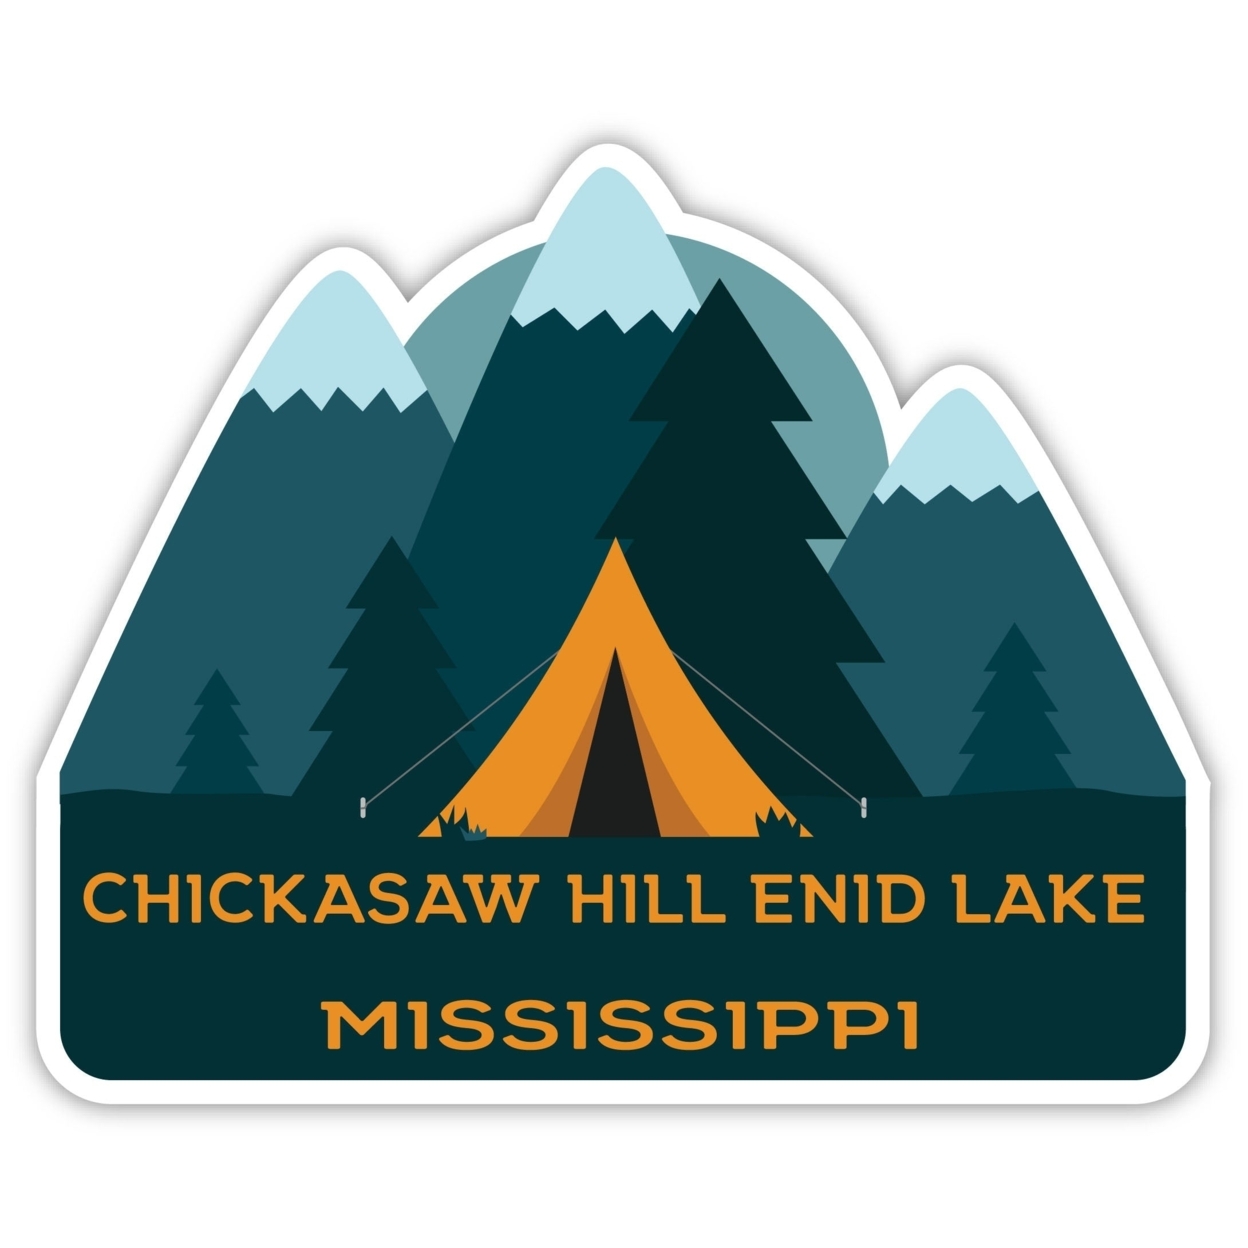 Chickasaw Hill Enid Lake Mississippi Souvenir Decorative Stickers (Choose Theme And Size) - Single Unit, 6-Inch, Tent